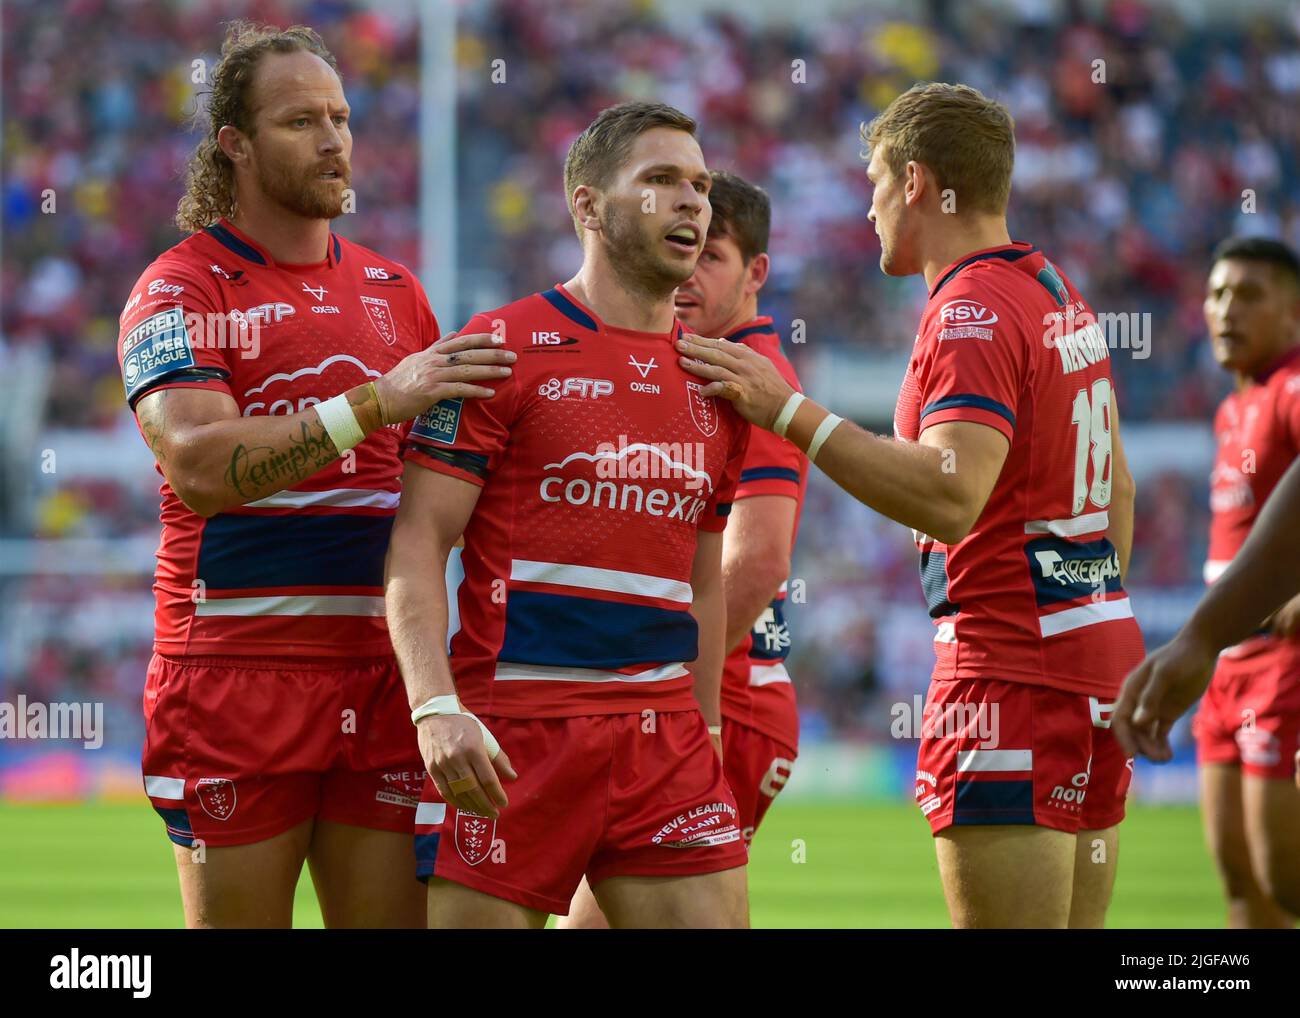 Newcastle, UK. 10th July, 2022. Matt Parcell of Hull KR scores a try Hull KR v Hull FC  Event: Magic Weekend 2022 Venue: St James Park, Newcastle, UK Date: 10th July 2022 Credit: Craig Cresswell/Alamy Live News Stock Photo